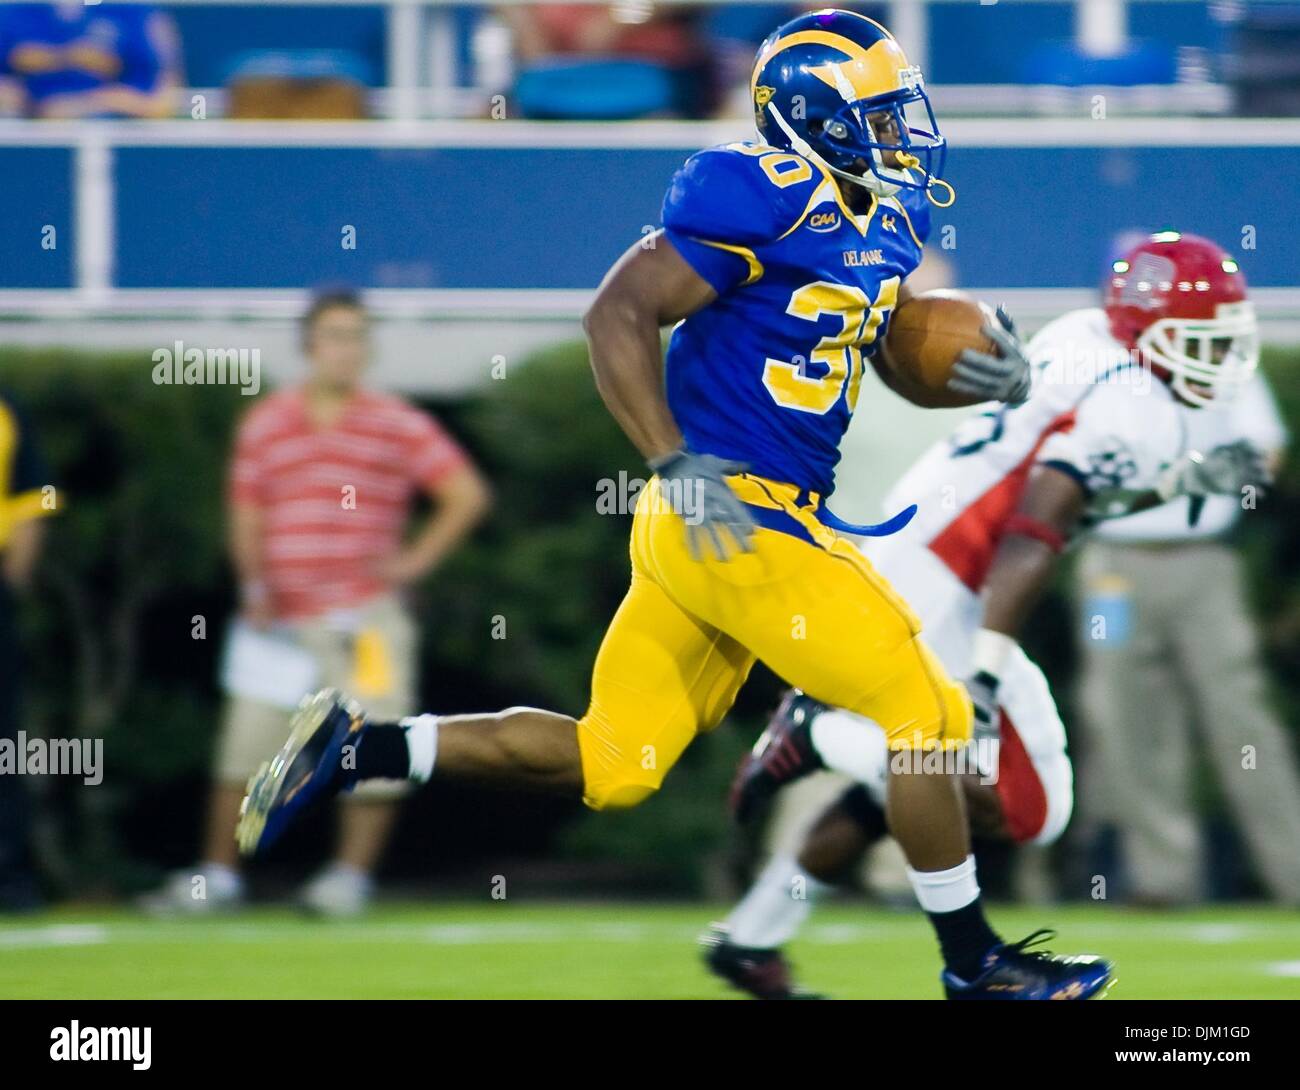 Sept. 18, 2010 - Newark, Delaware, United States of America - Delaware RB (#30) Andrew Pierce in the 3rd quarter. Pierce setting a University of Delaware rookie record with 200 yards and two touchdowns at Delaware Stadium in Newark Delaware. Delaware defeated Duquesne 30-6 (Credit Image: © Saquan Stimpson/Southcreek Global/ZUMApress.com) Stock Photo